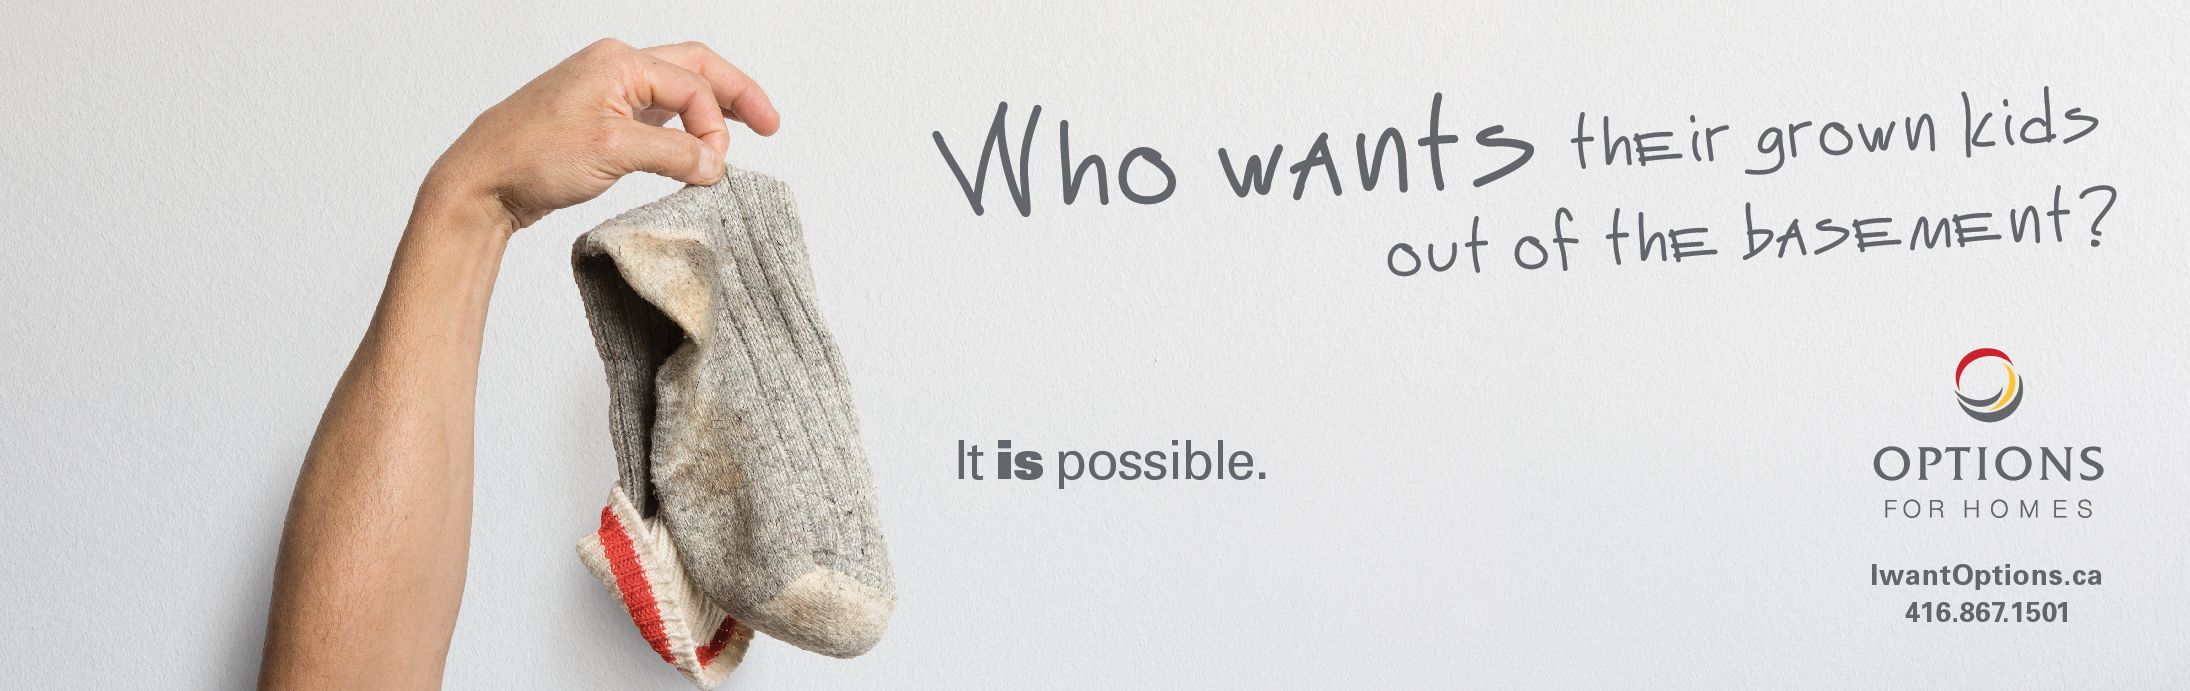 A man's hand holding up a dirty grey sock against a white background with the grey capitalize text 